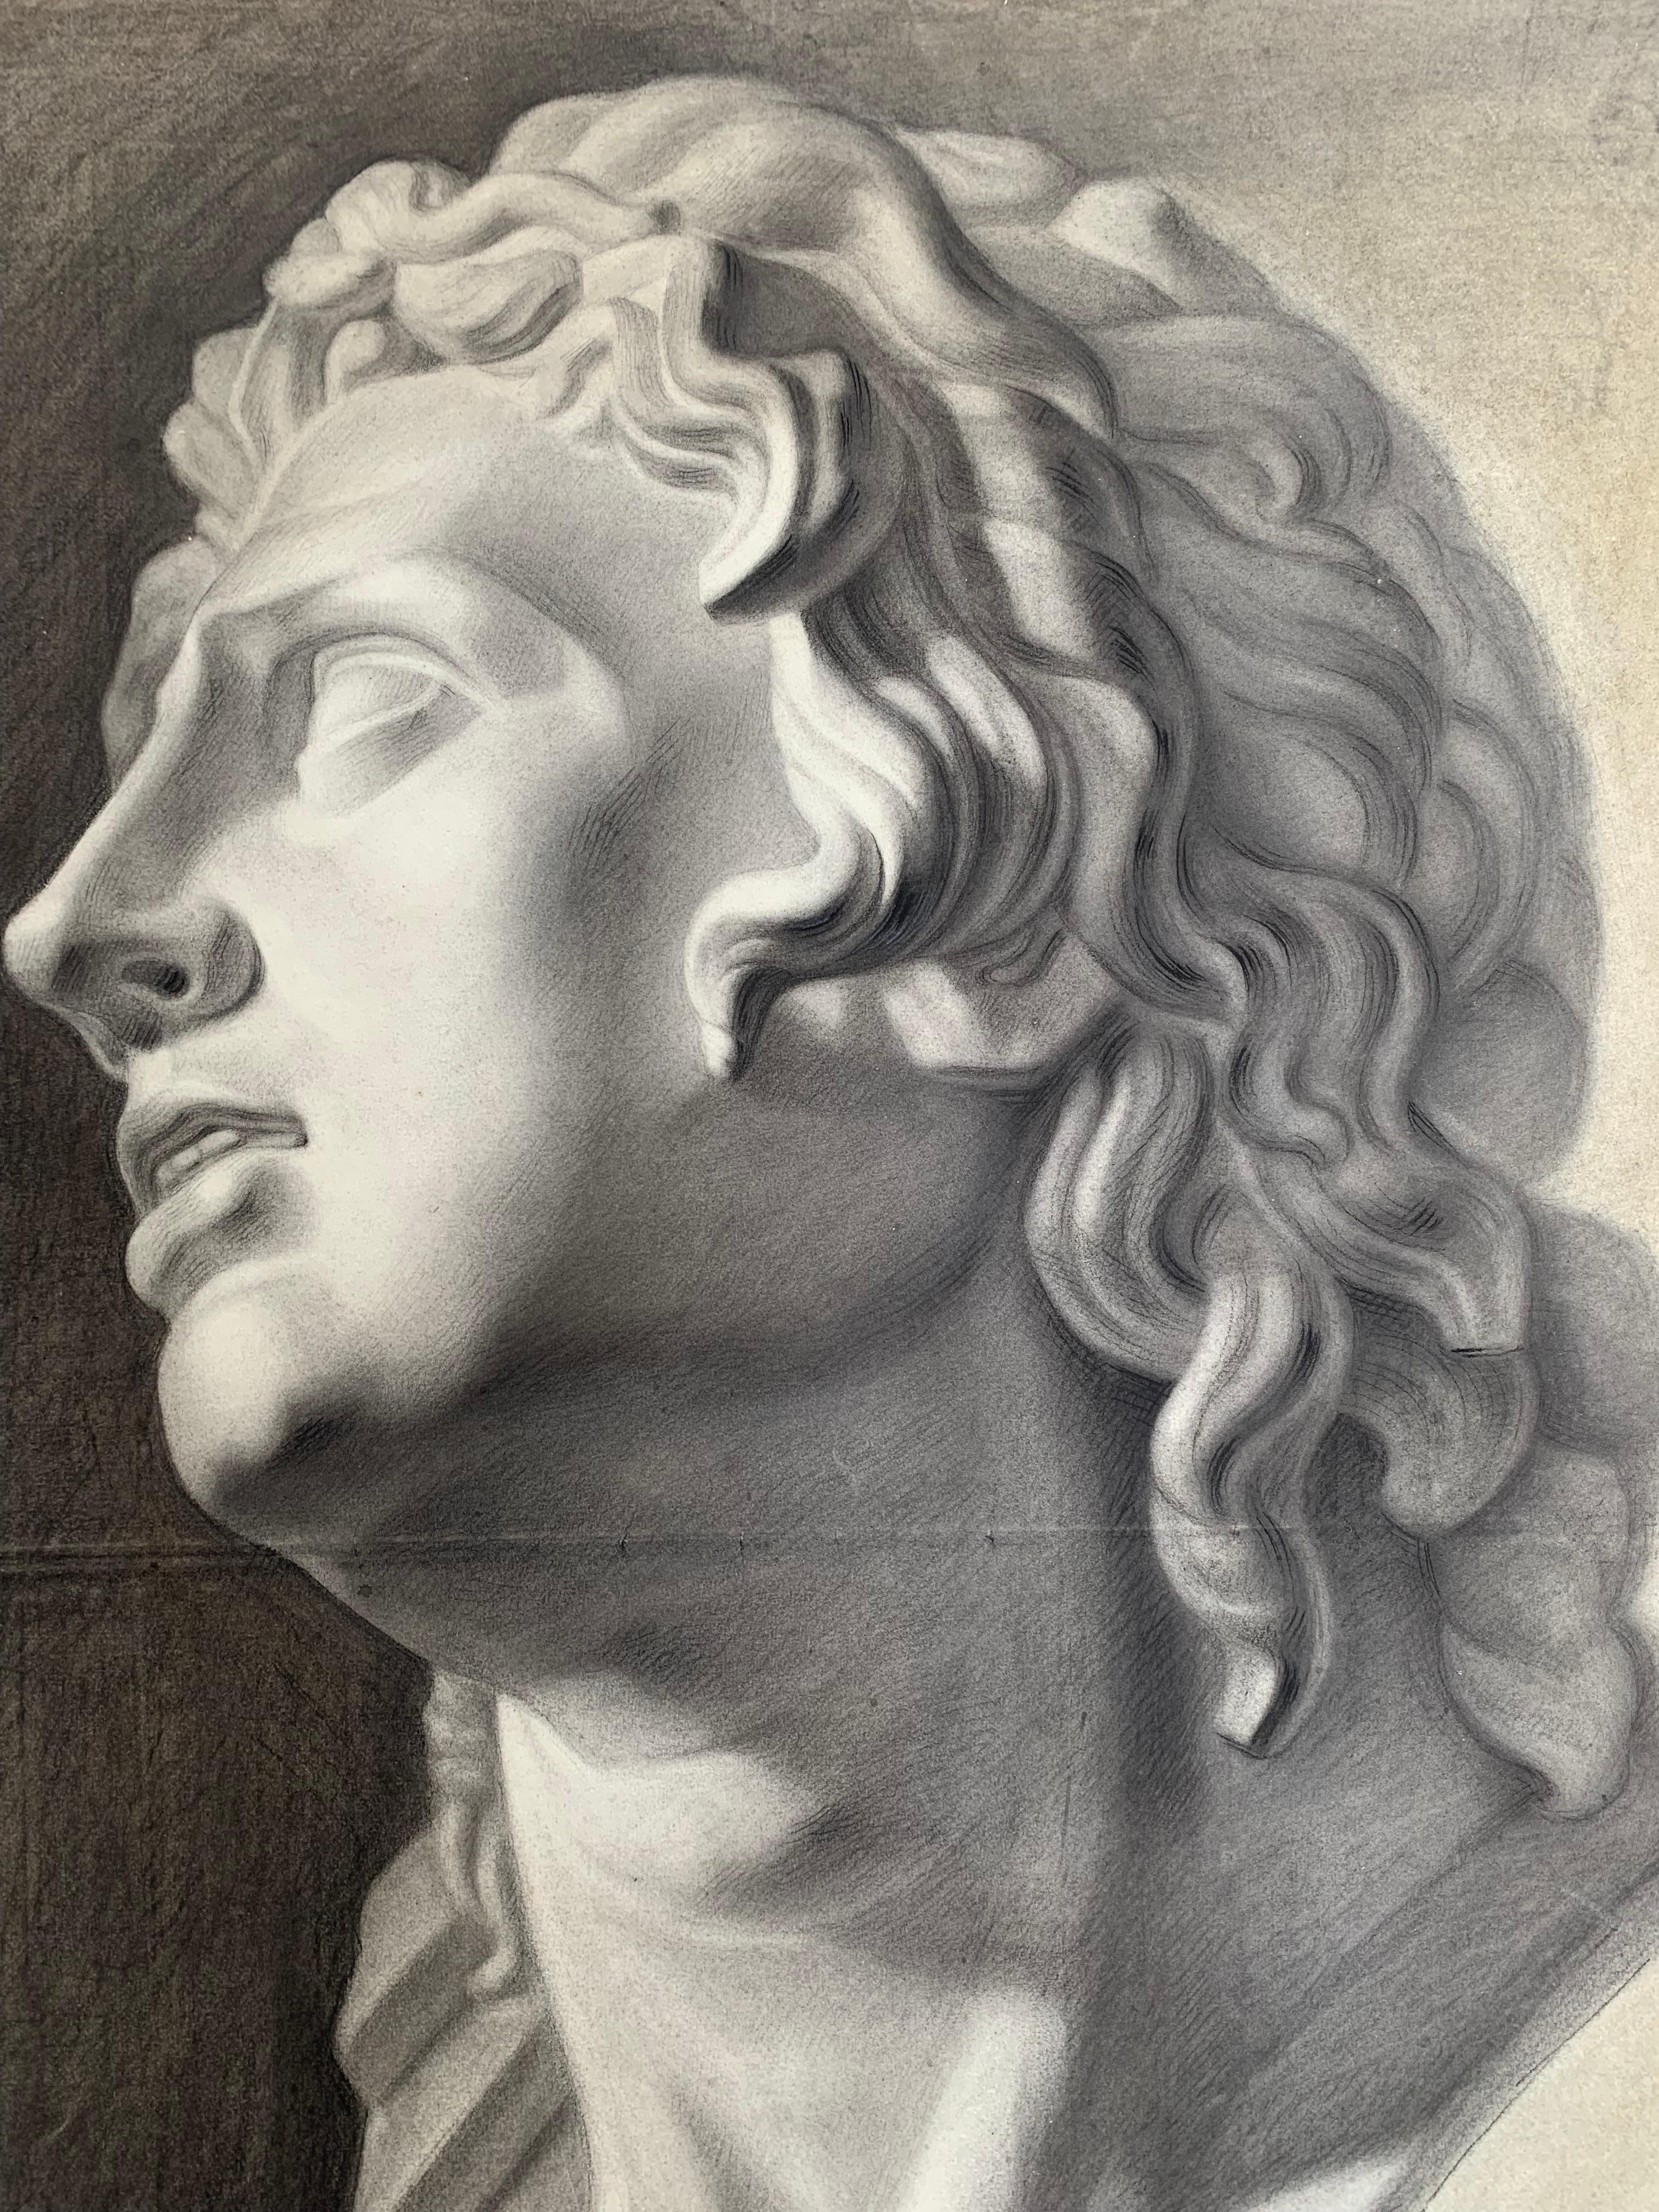 Large XIXth cent. Academic drawing of Alexander The Great’s bust from Uffizi.  1